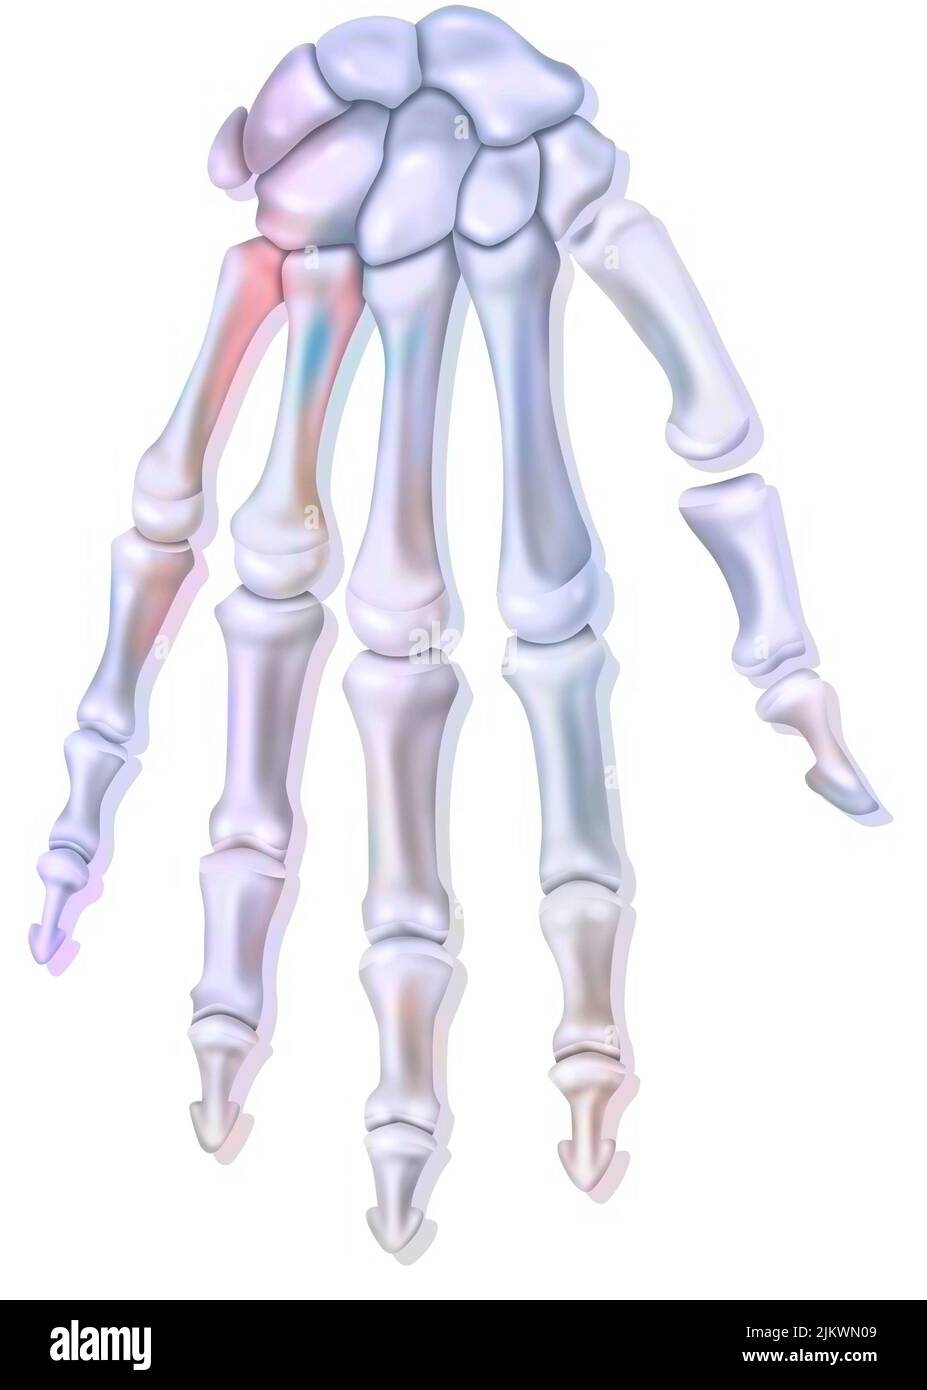 Bones of the right hand in dorsal view. Stock Photo